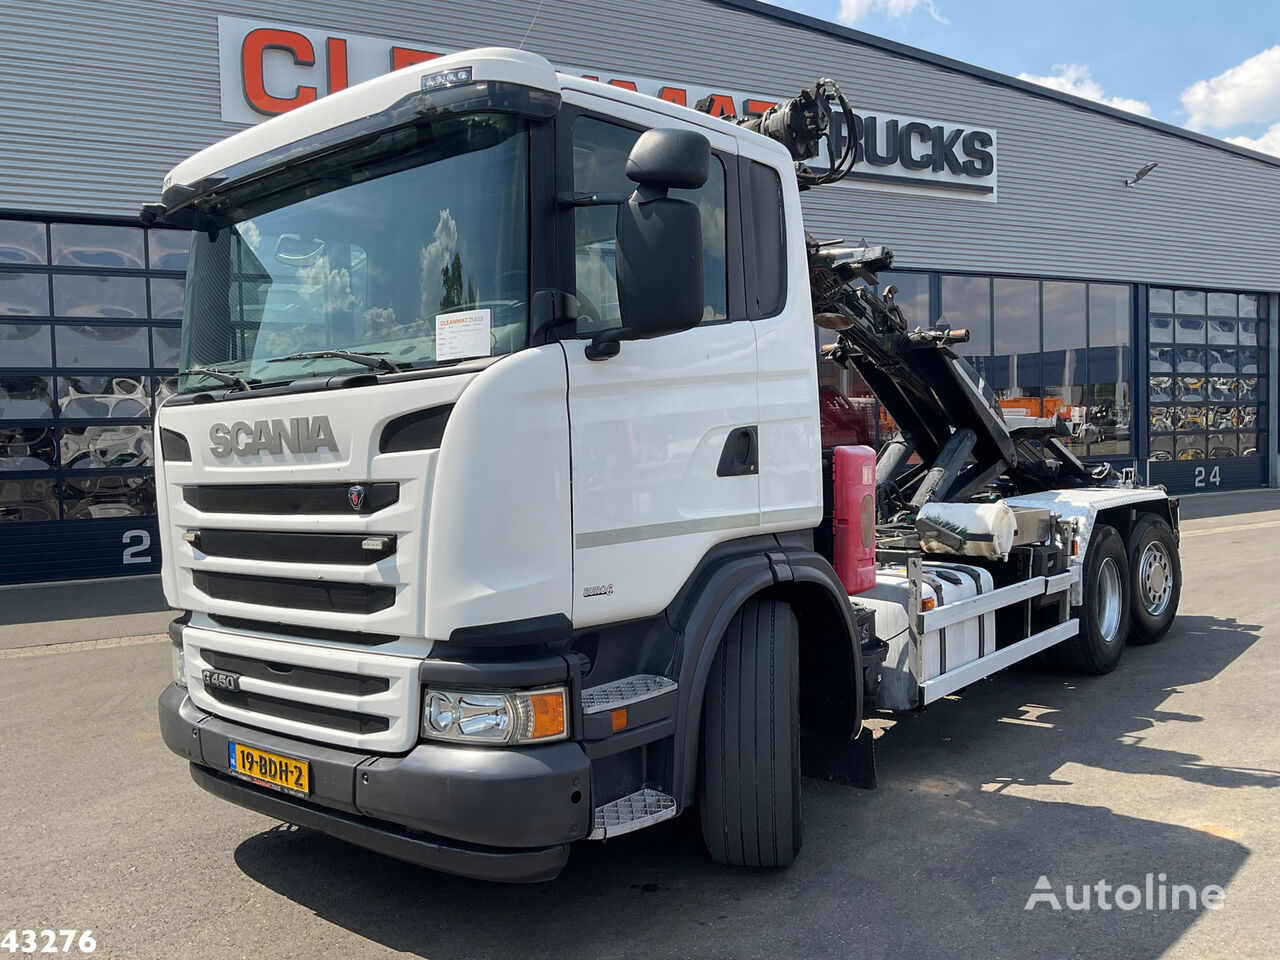 Scania G 450 Euro 6 Translift 28 Ton containersysteem kabelsysteem truck